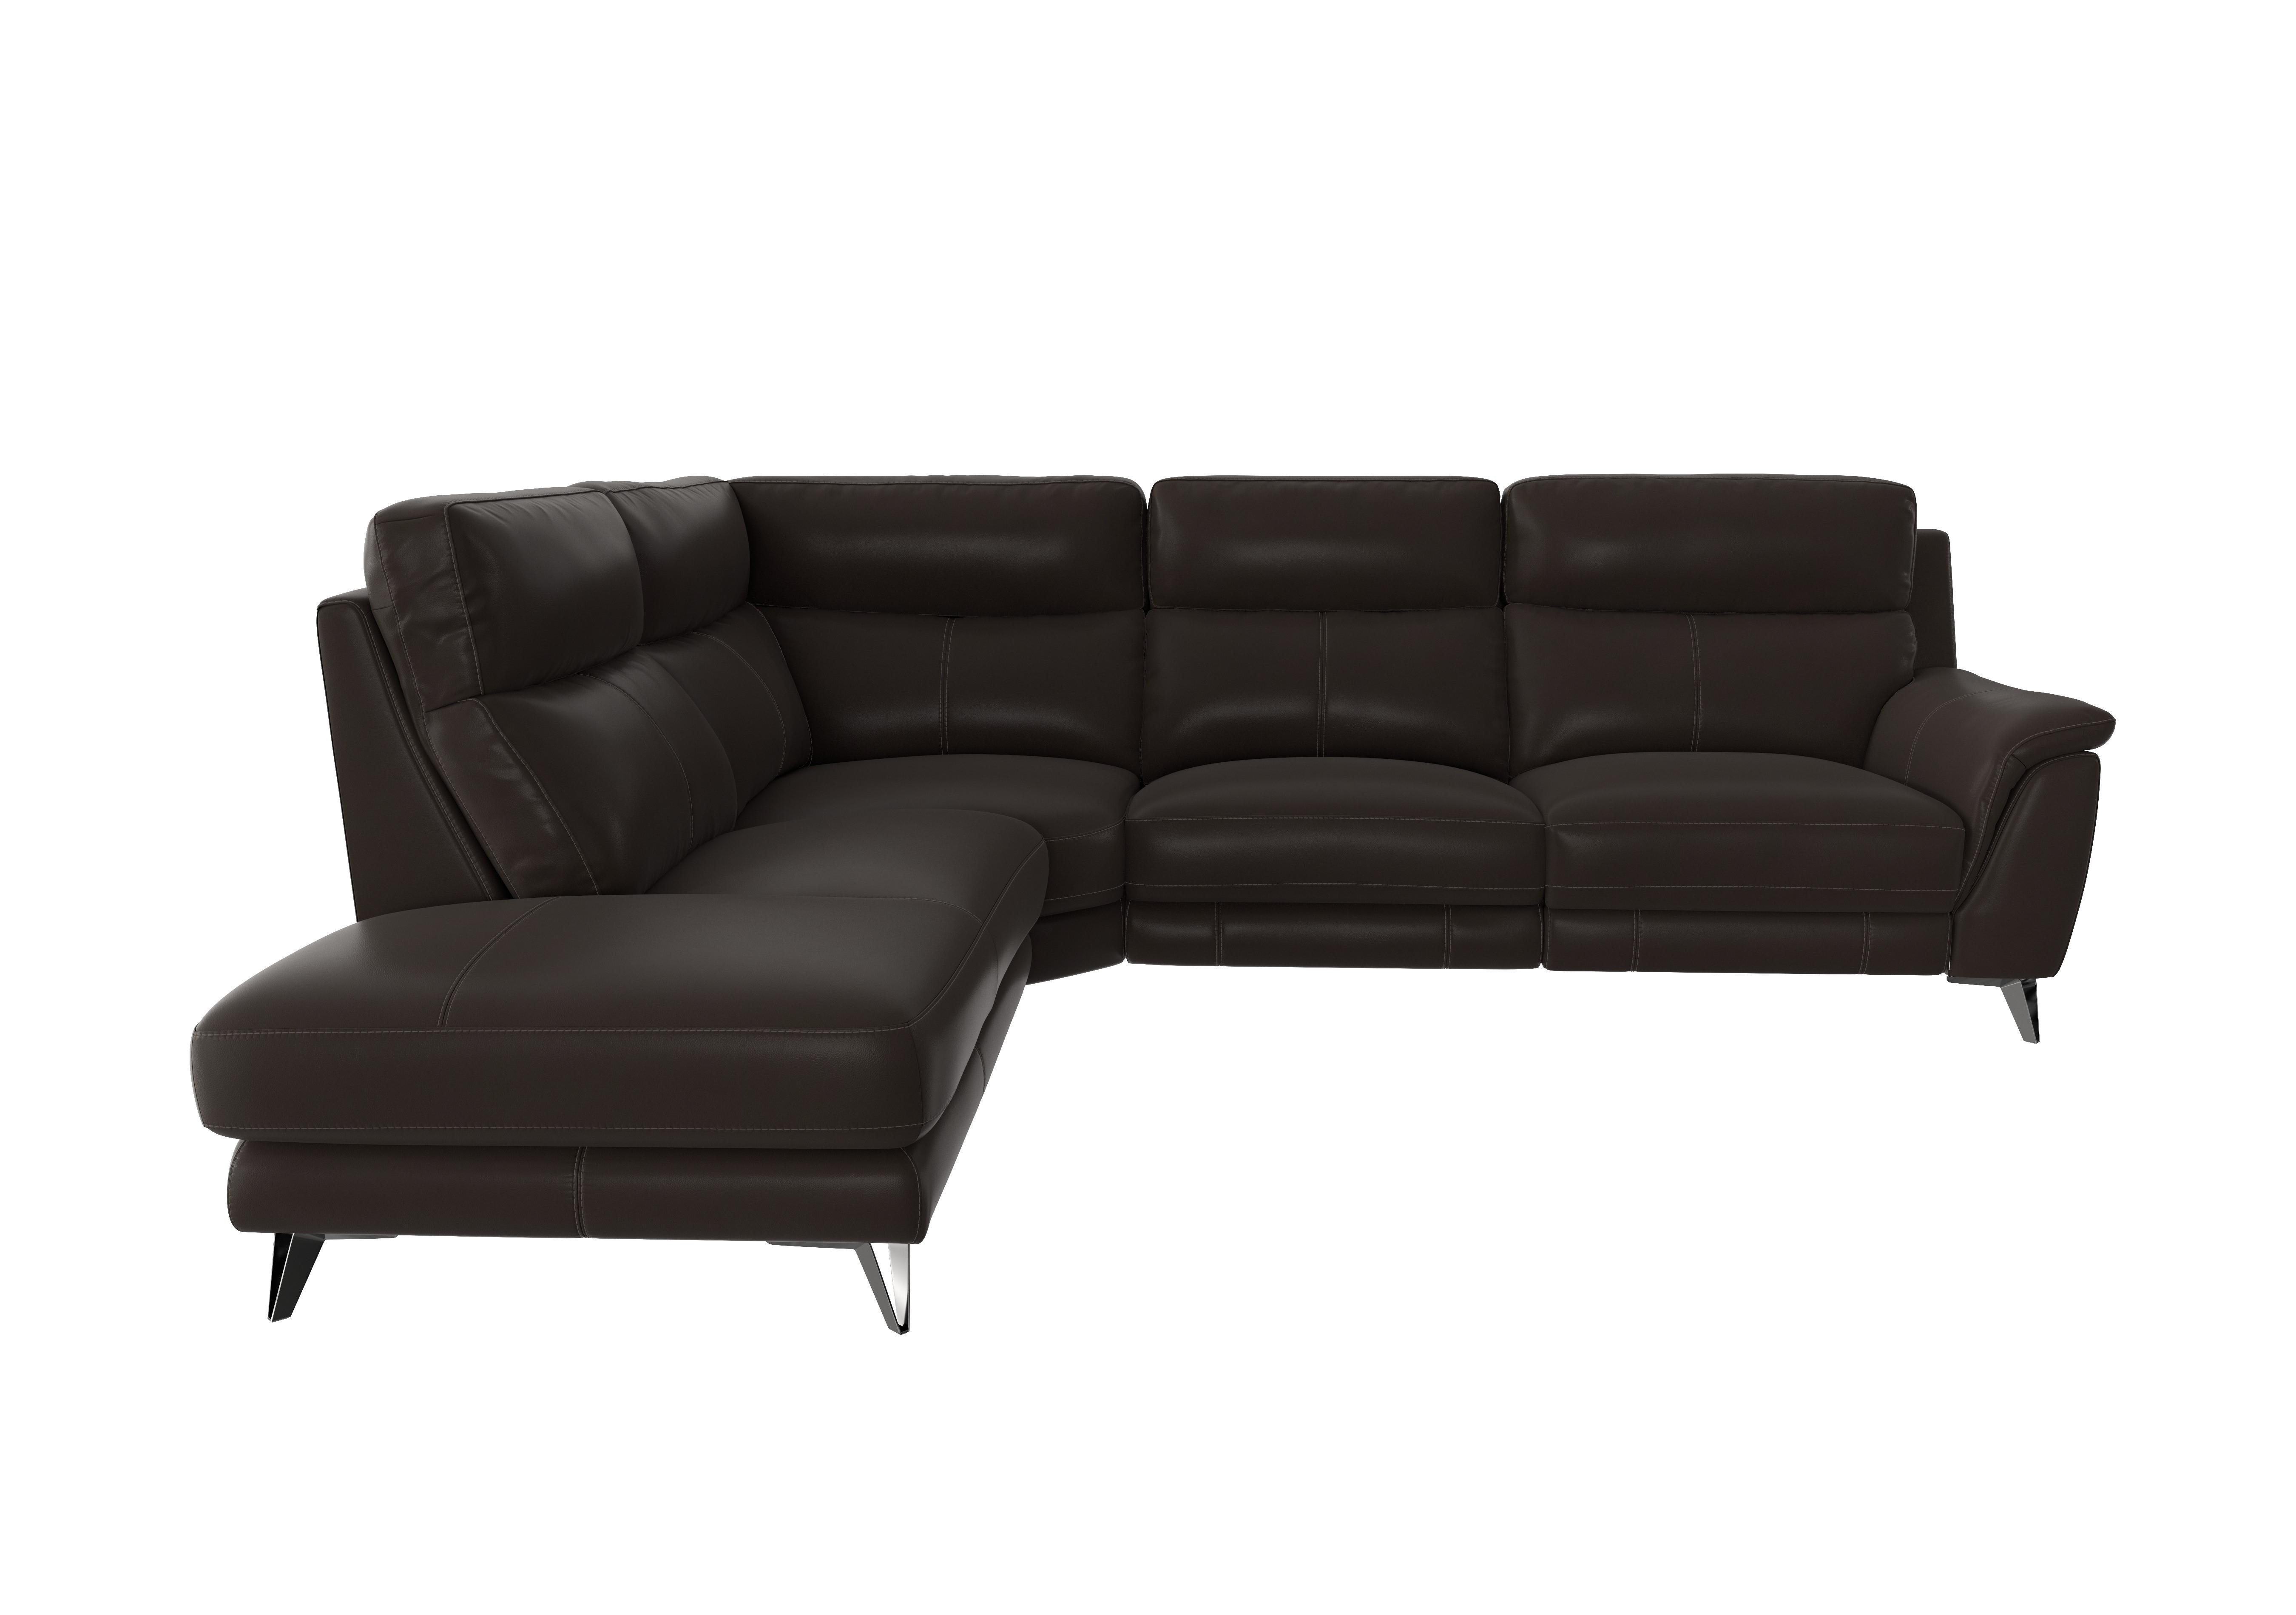 Contempo Chaise End Leather Sofa in Bv-1748 Dark Chocolate on Furniture Village